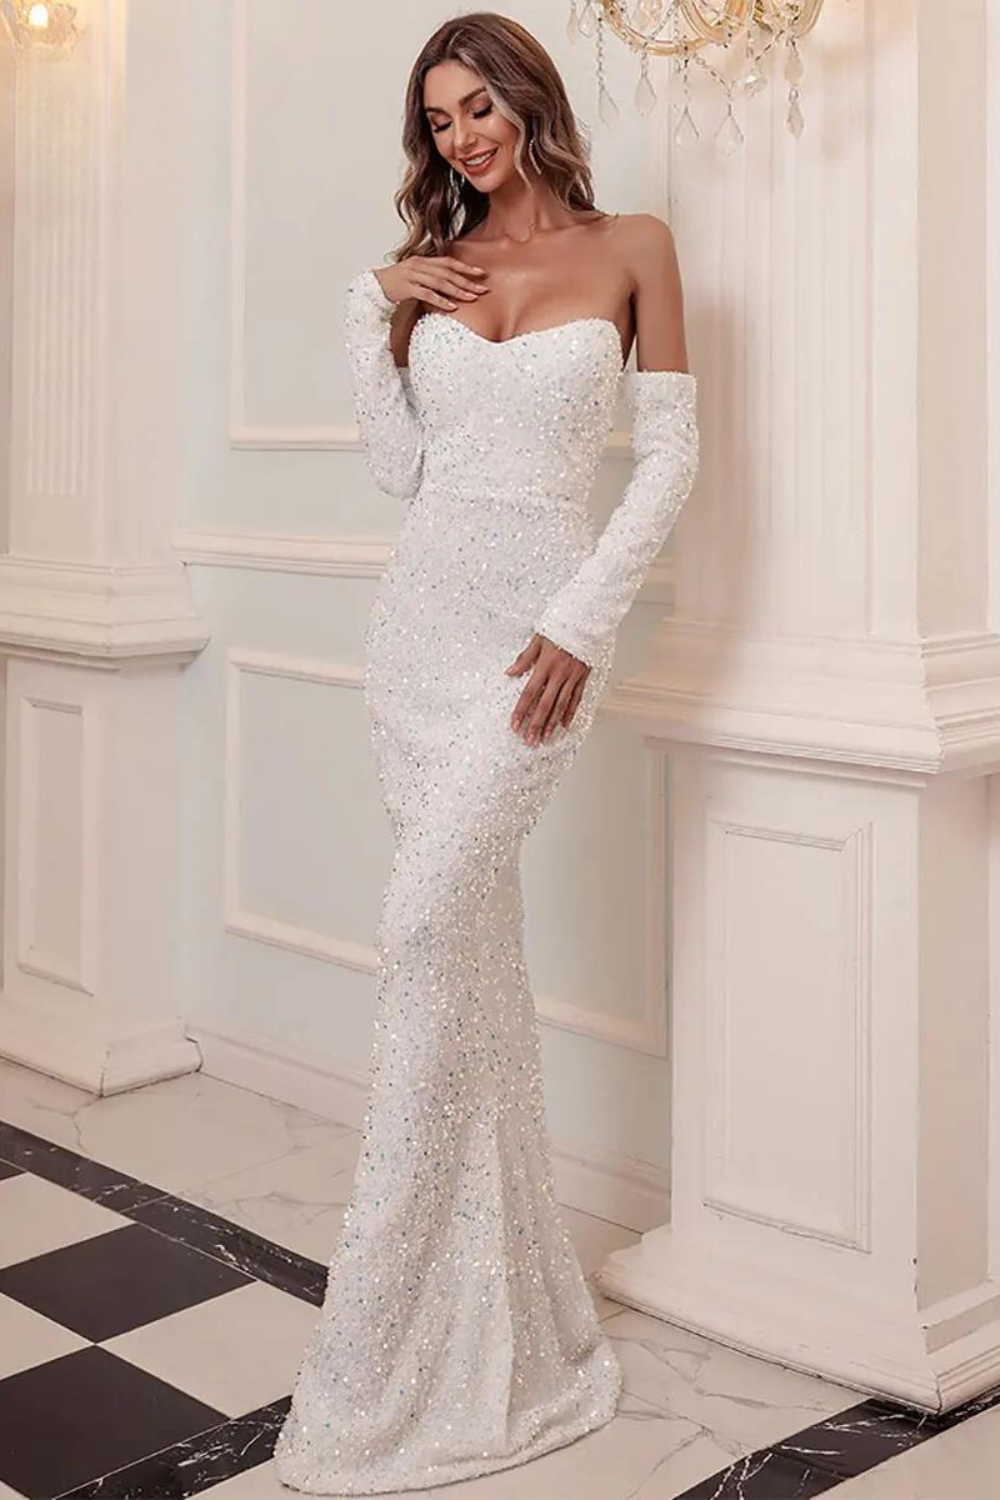 Elegant Off-the-Shoulder Sequined Gown -Women’s Long Sleeve Bodycon Evening,Wedding, Prom  Dress